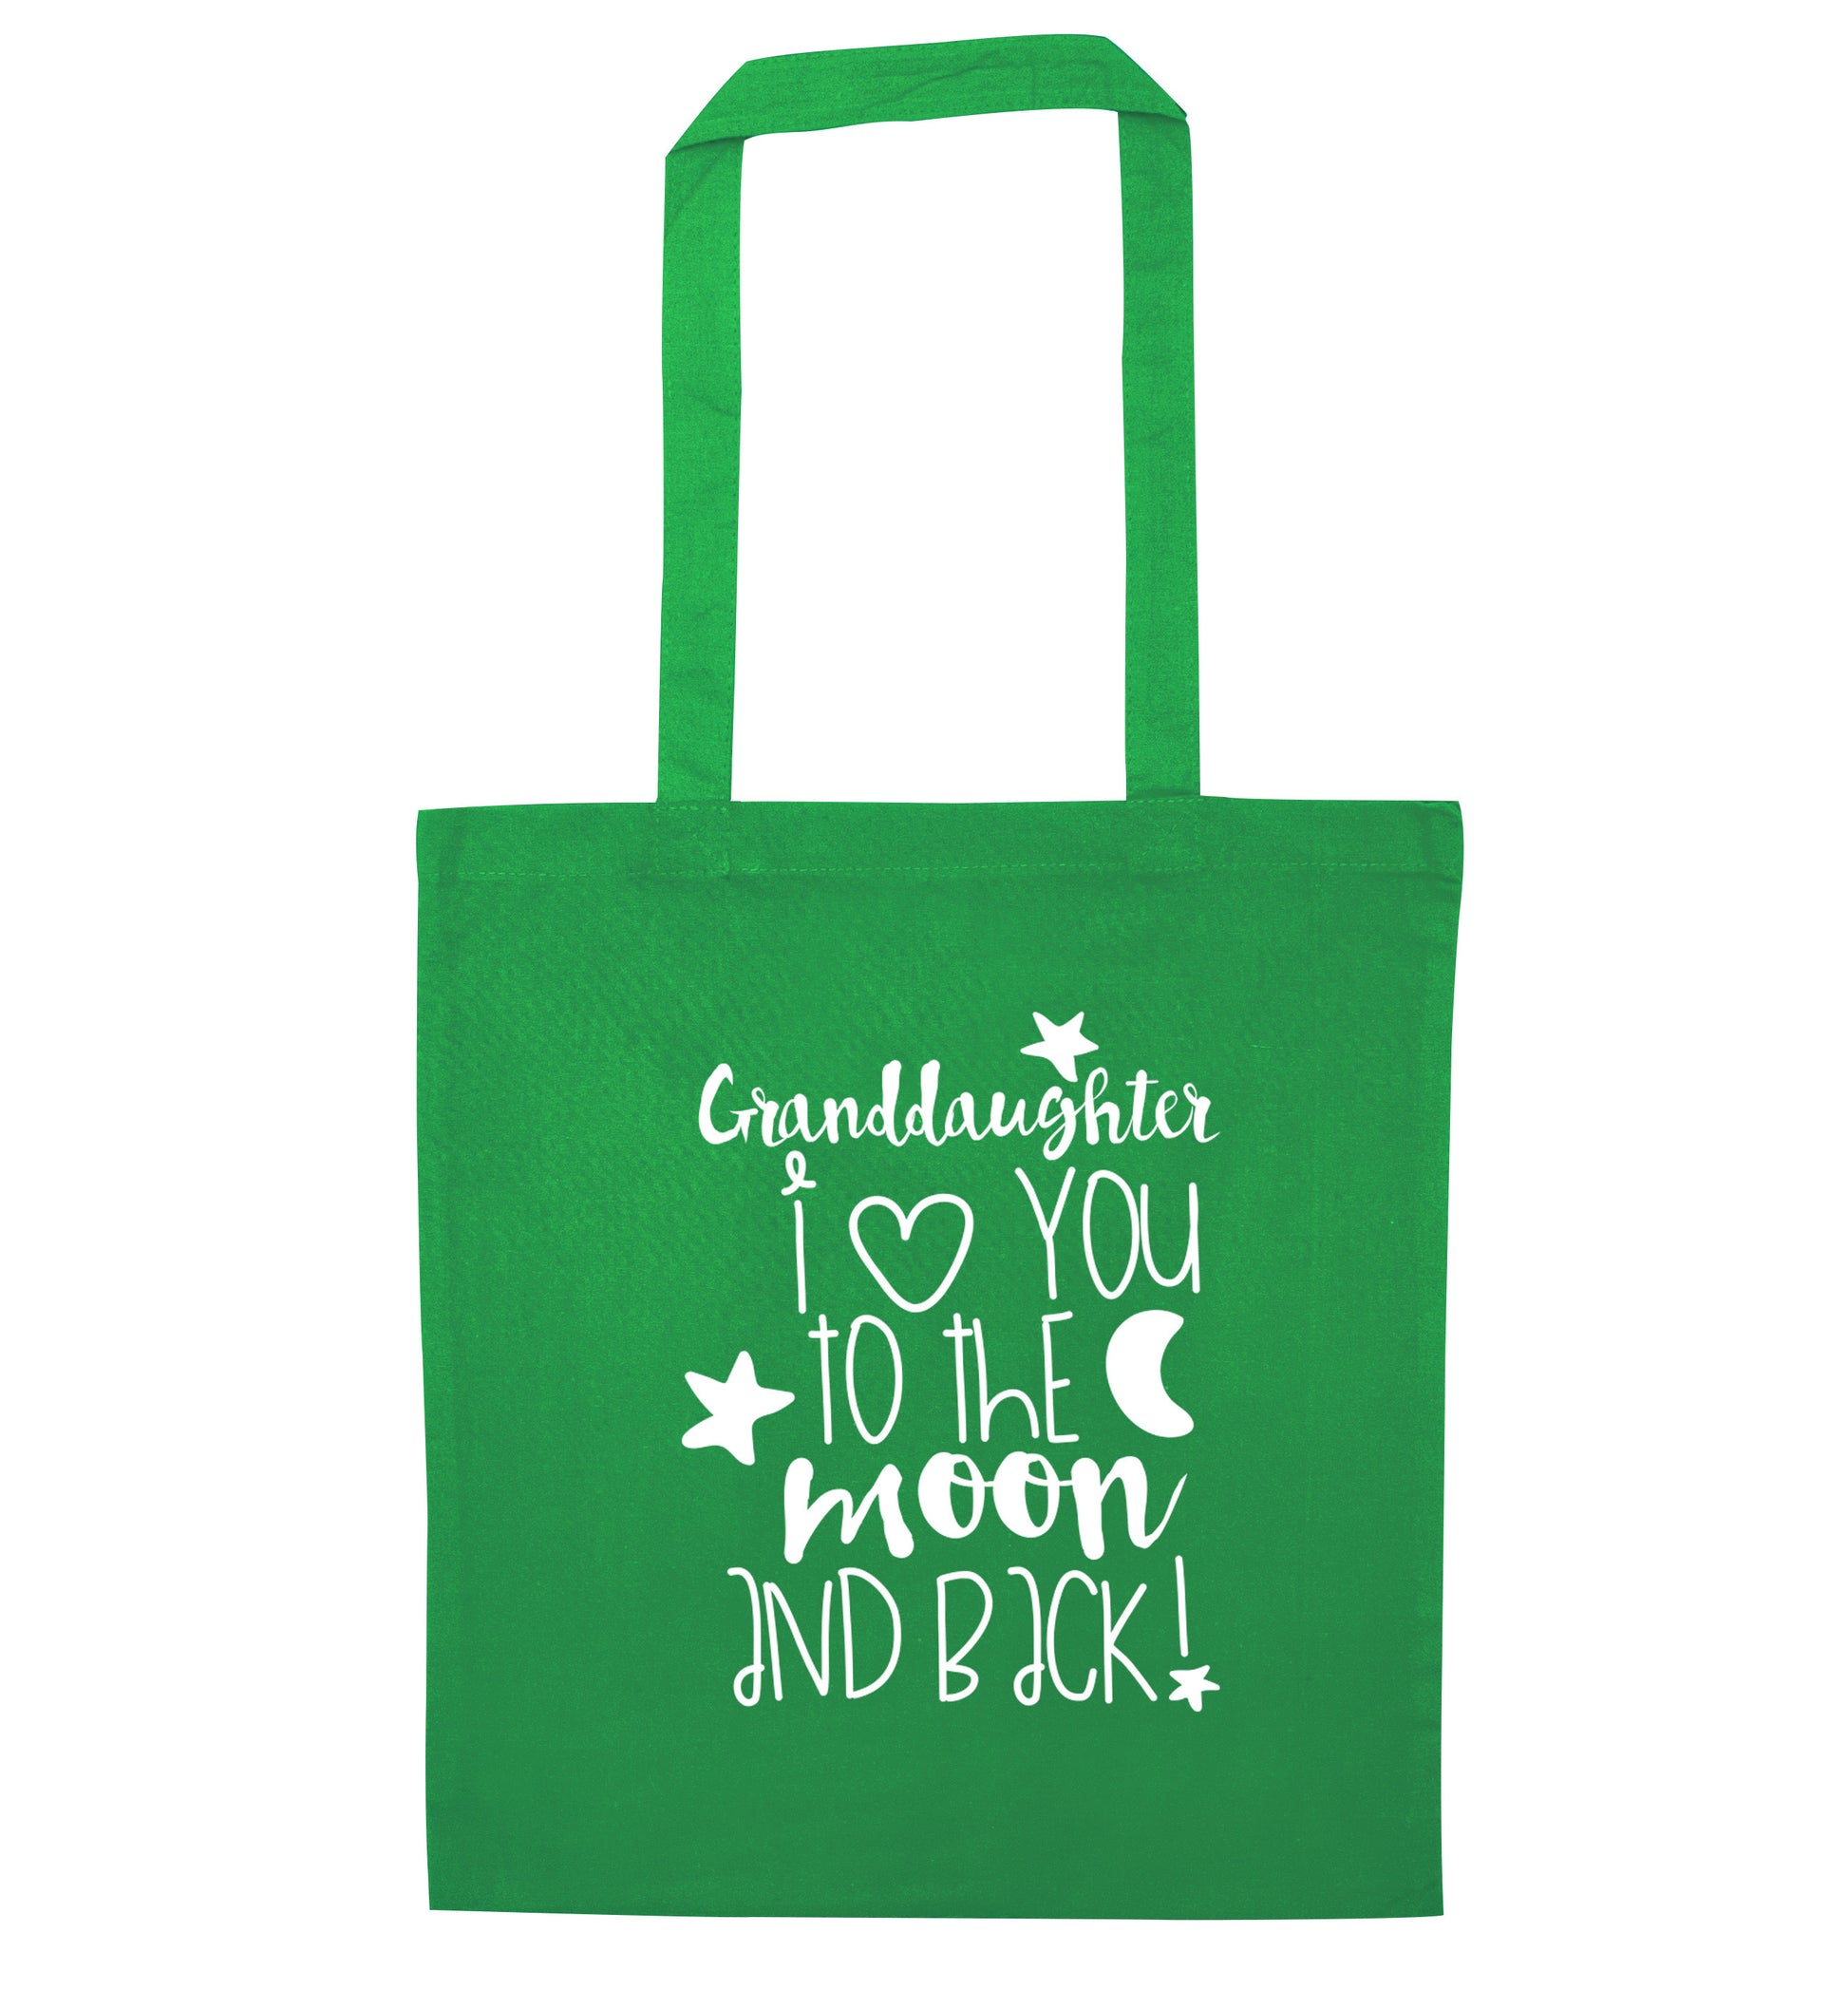 Granddaughter I love you to the moon and back green tote bag